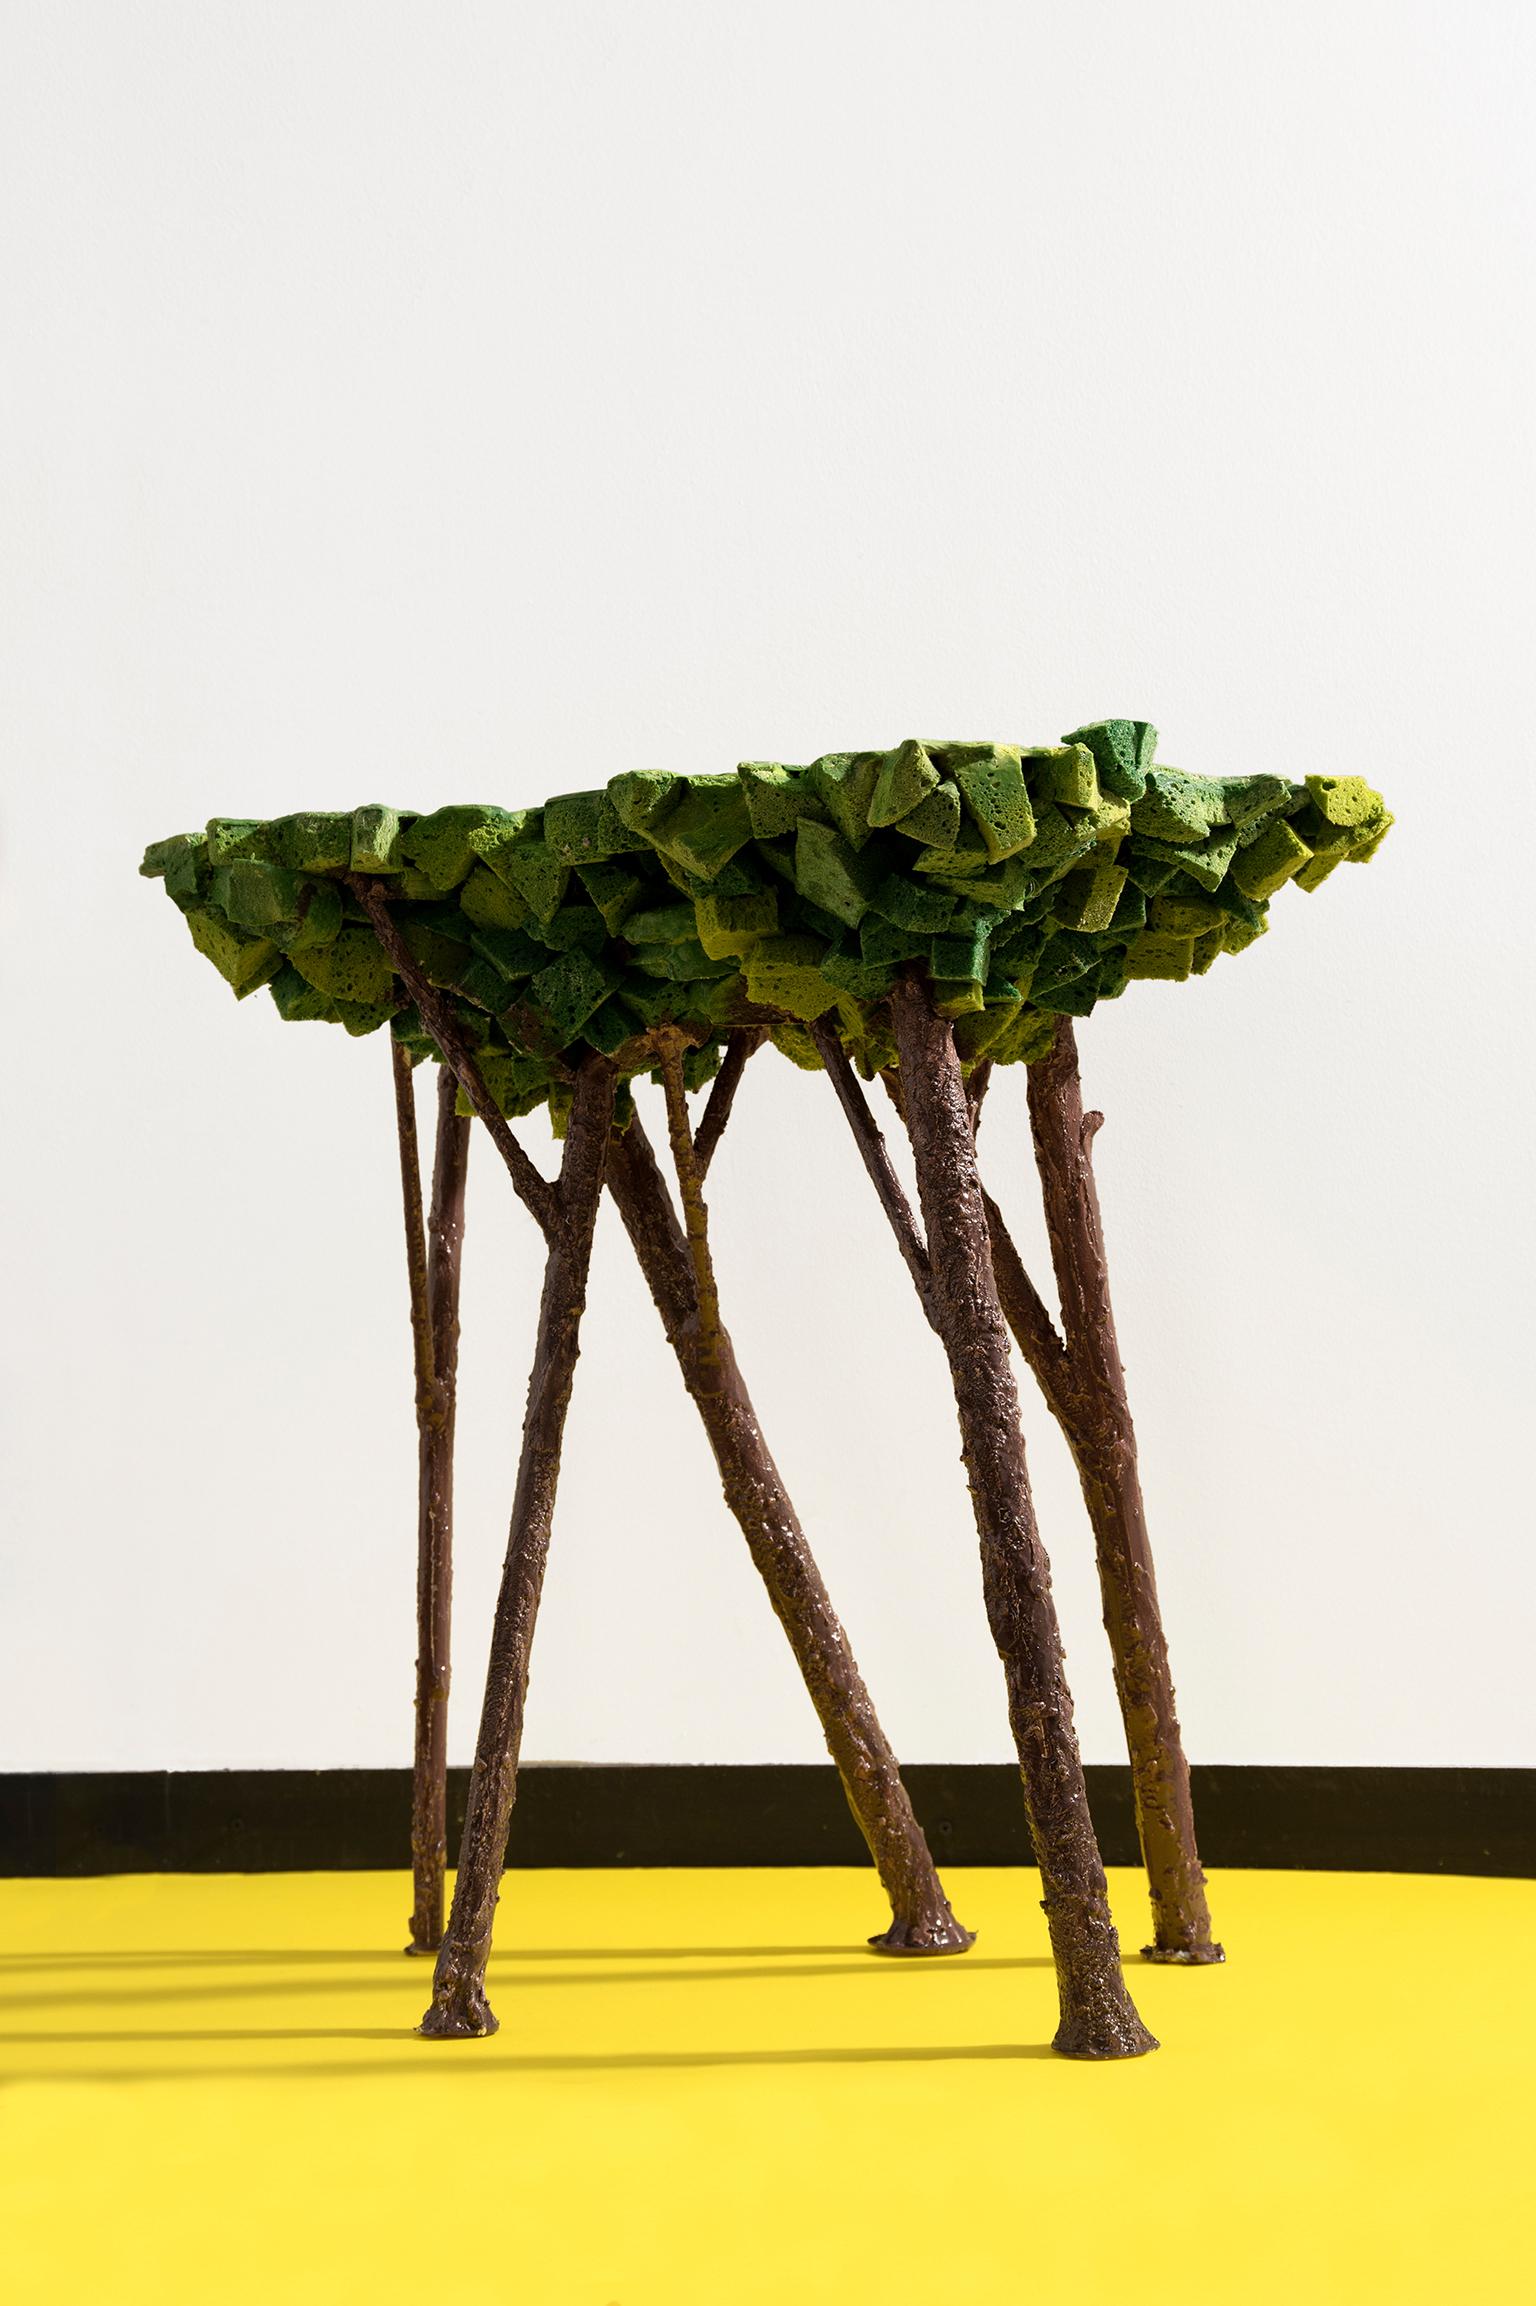 Matteo Pellegrino for Camp Design Gallery
Arbre Magique, 2018
Side table

Wood, epoxy resin, realized in collaboration with Gobbetto Company
Measures: H 64.8, L 68.5, W 46 cm.

Prototype
2018
Italy
Photo credit/ Marta Marinotti

From 2017 on, Matteo